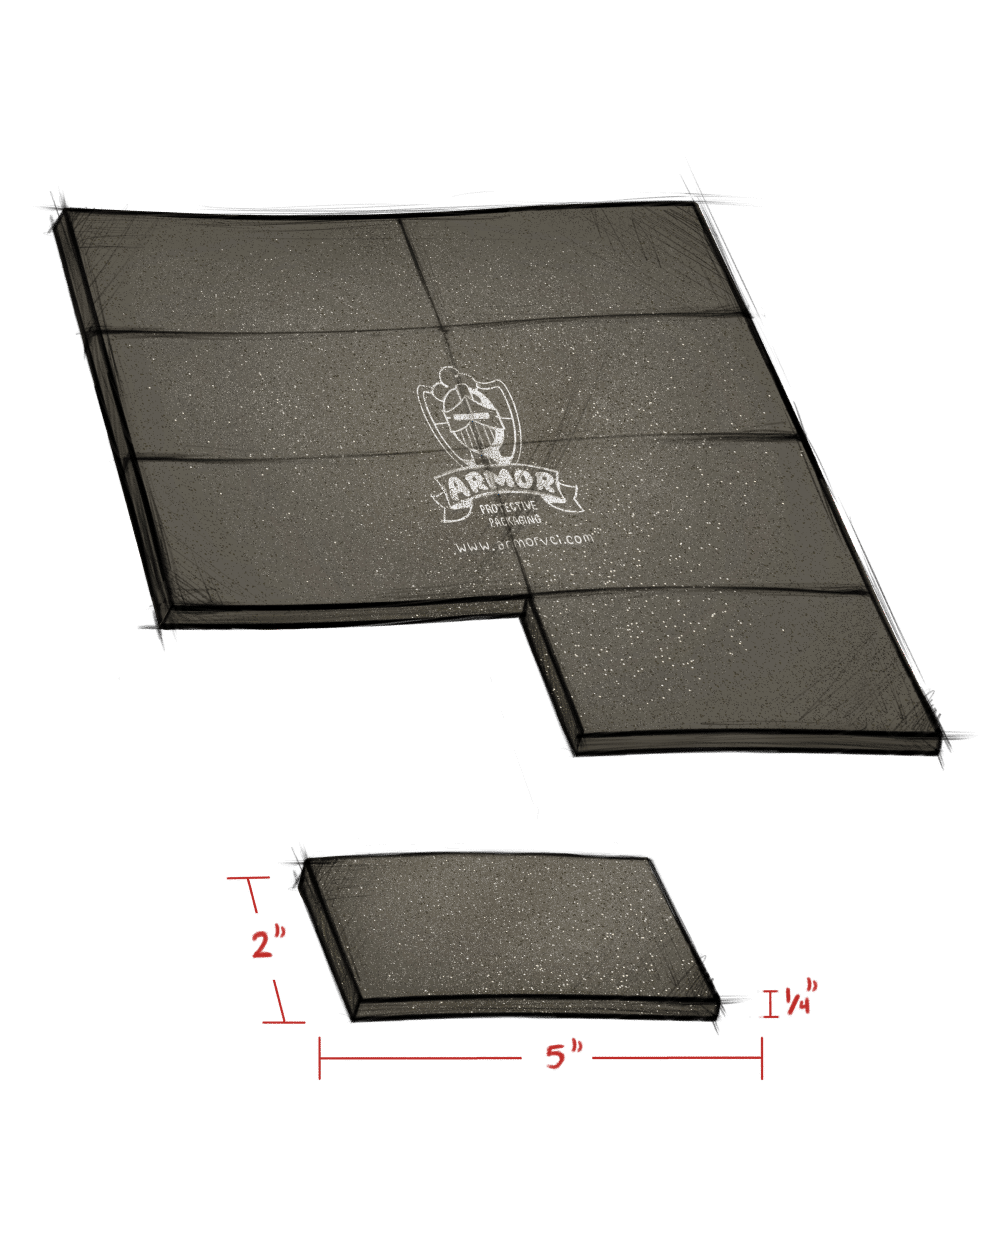 2x5 perforated ARMOR SHIELD® VCI Foam Emitter Pad illustration